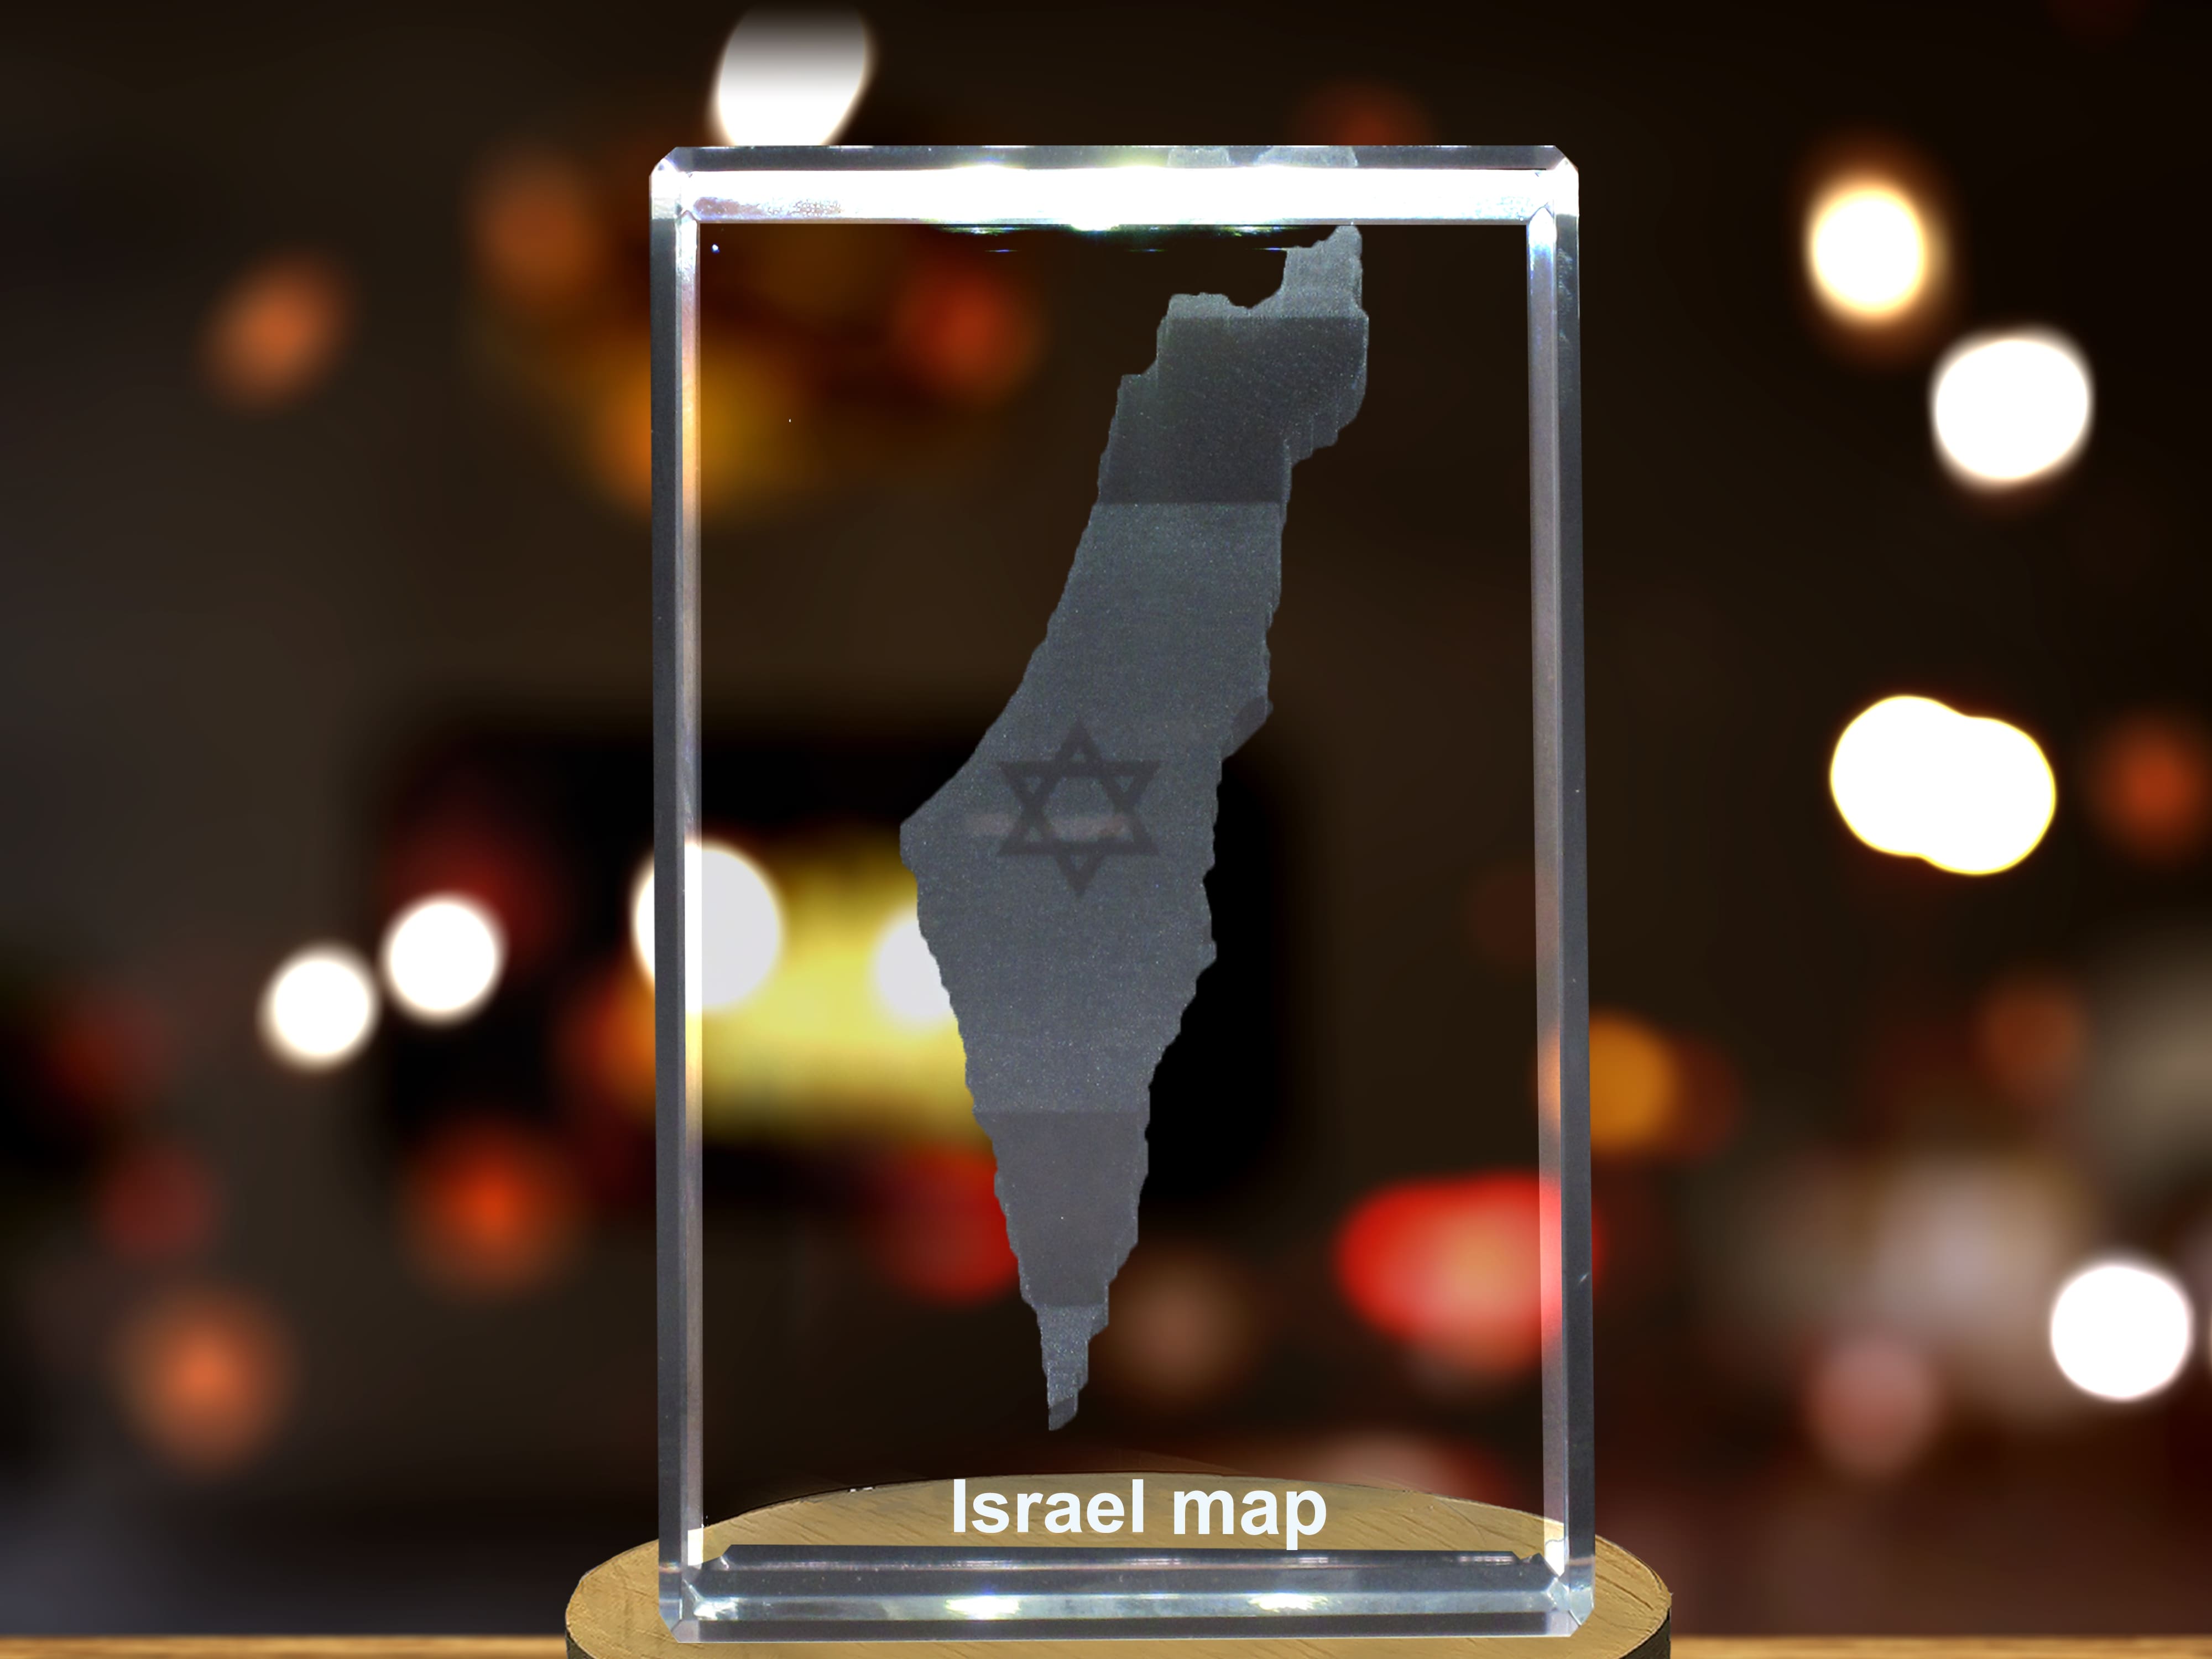 Israel 3D Engraved Crystal 3D Engraved Crystal Keepsake/Gift/Decor/Collectible/Souvenir A&B Crystal Collection